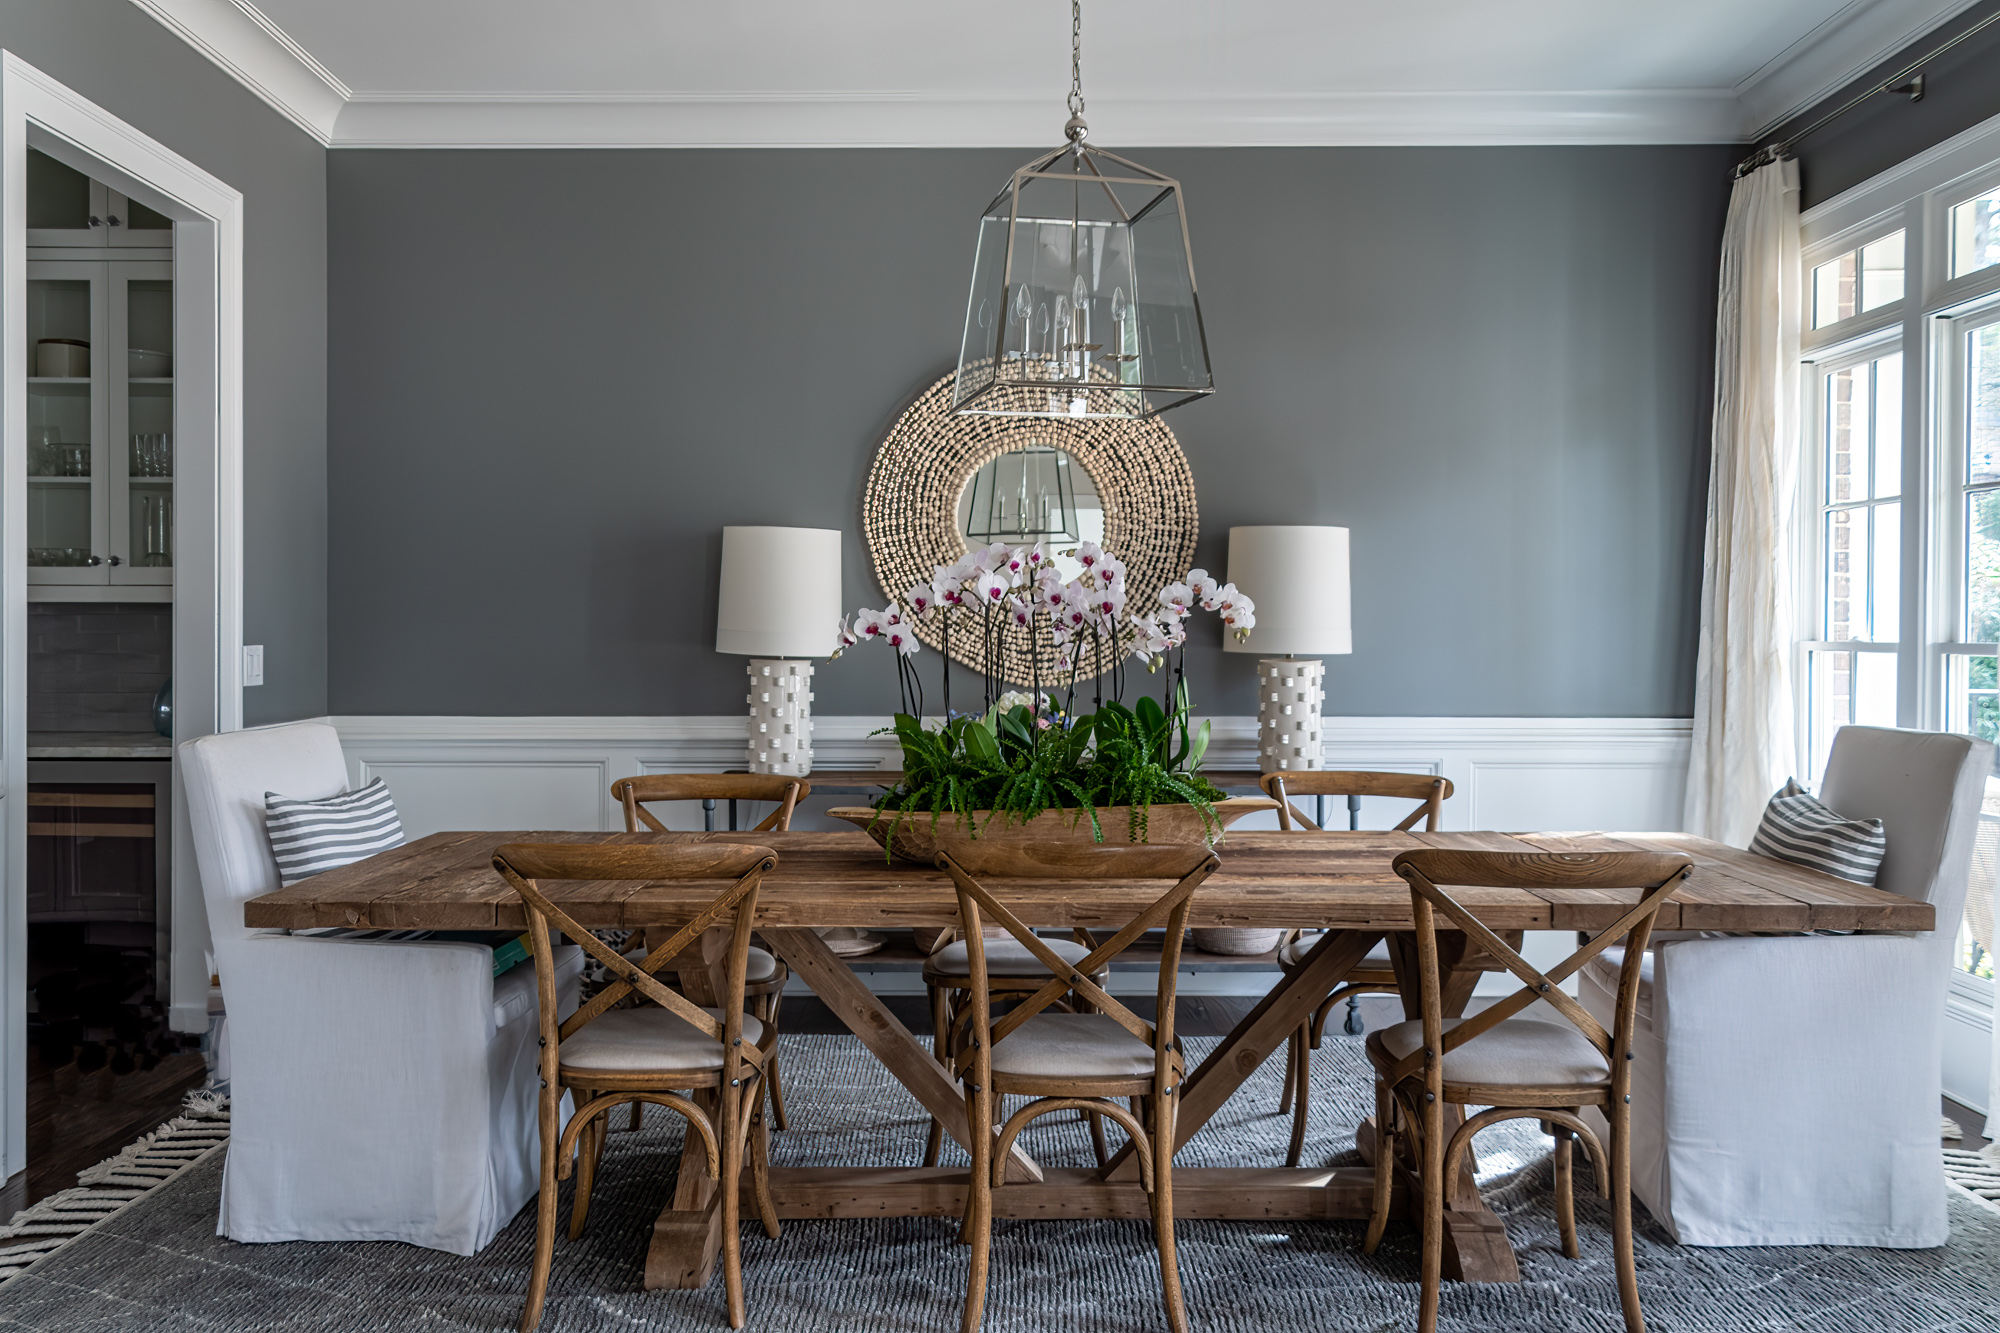 The dining table is reclaimed wood from Restoration Hardware.